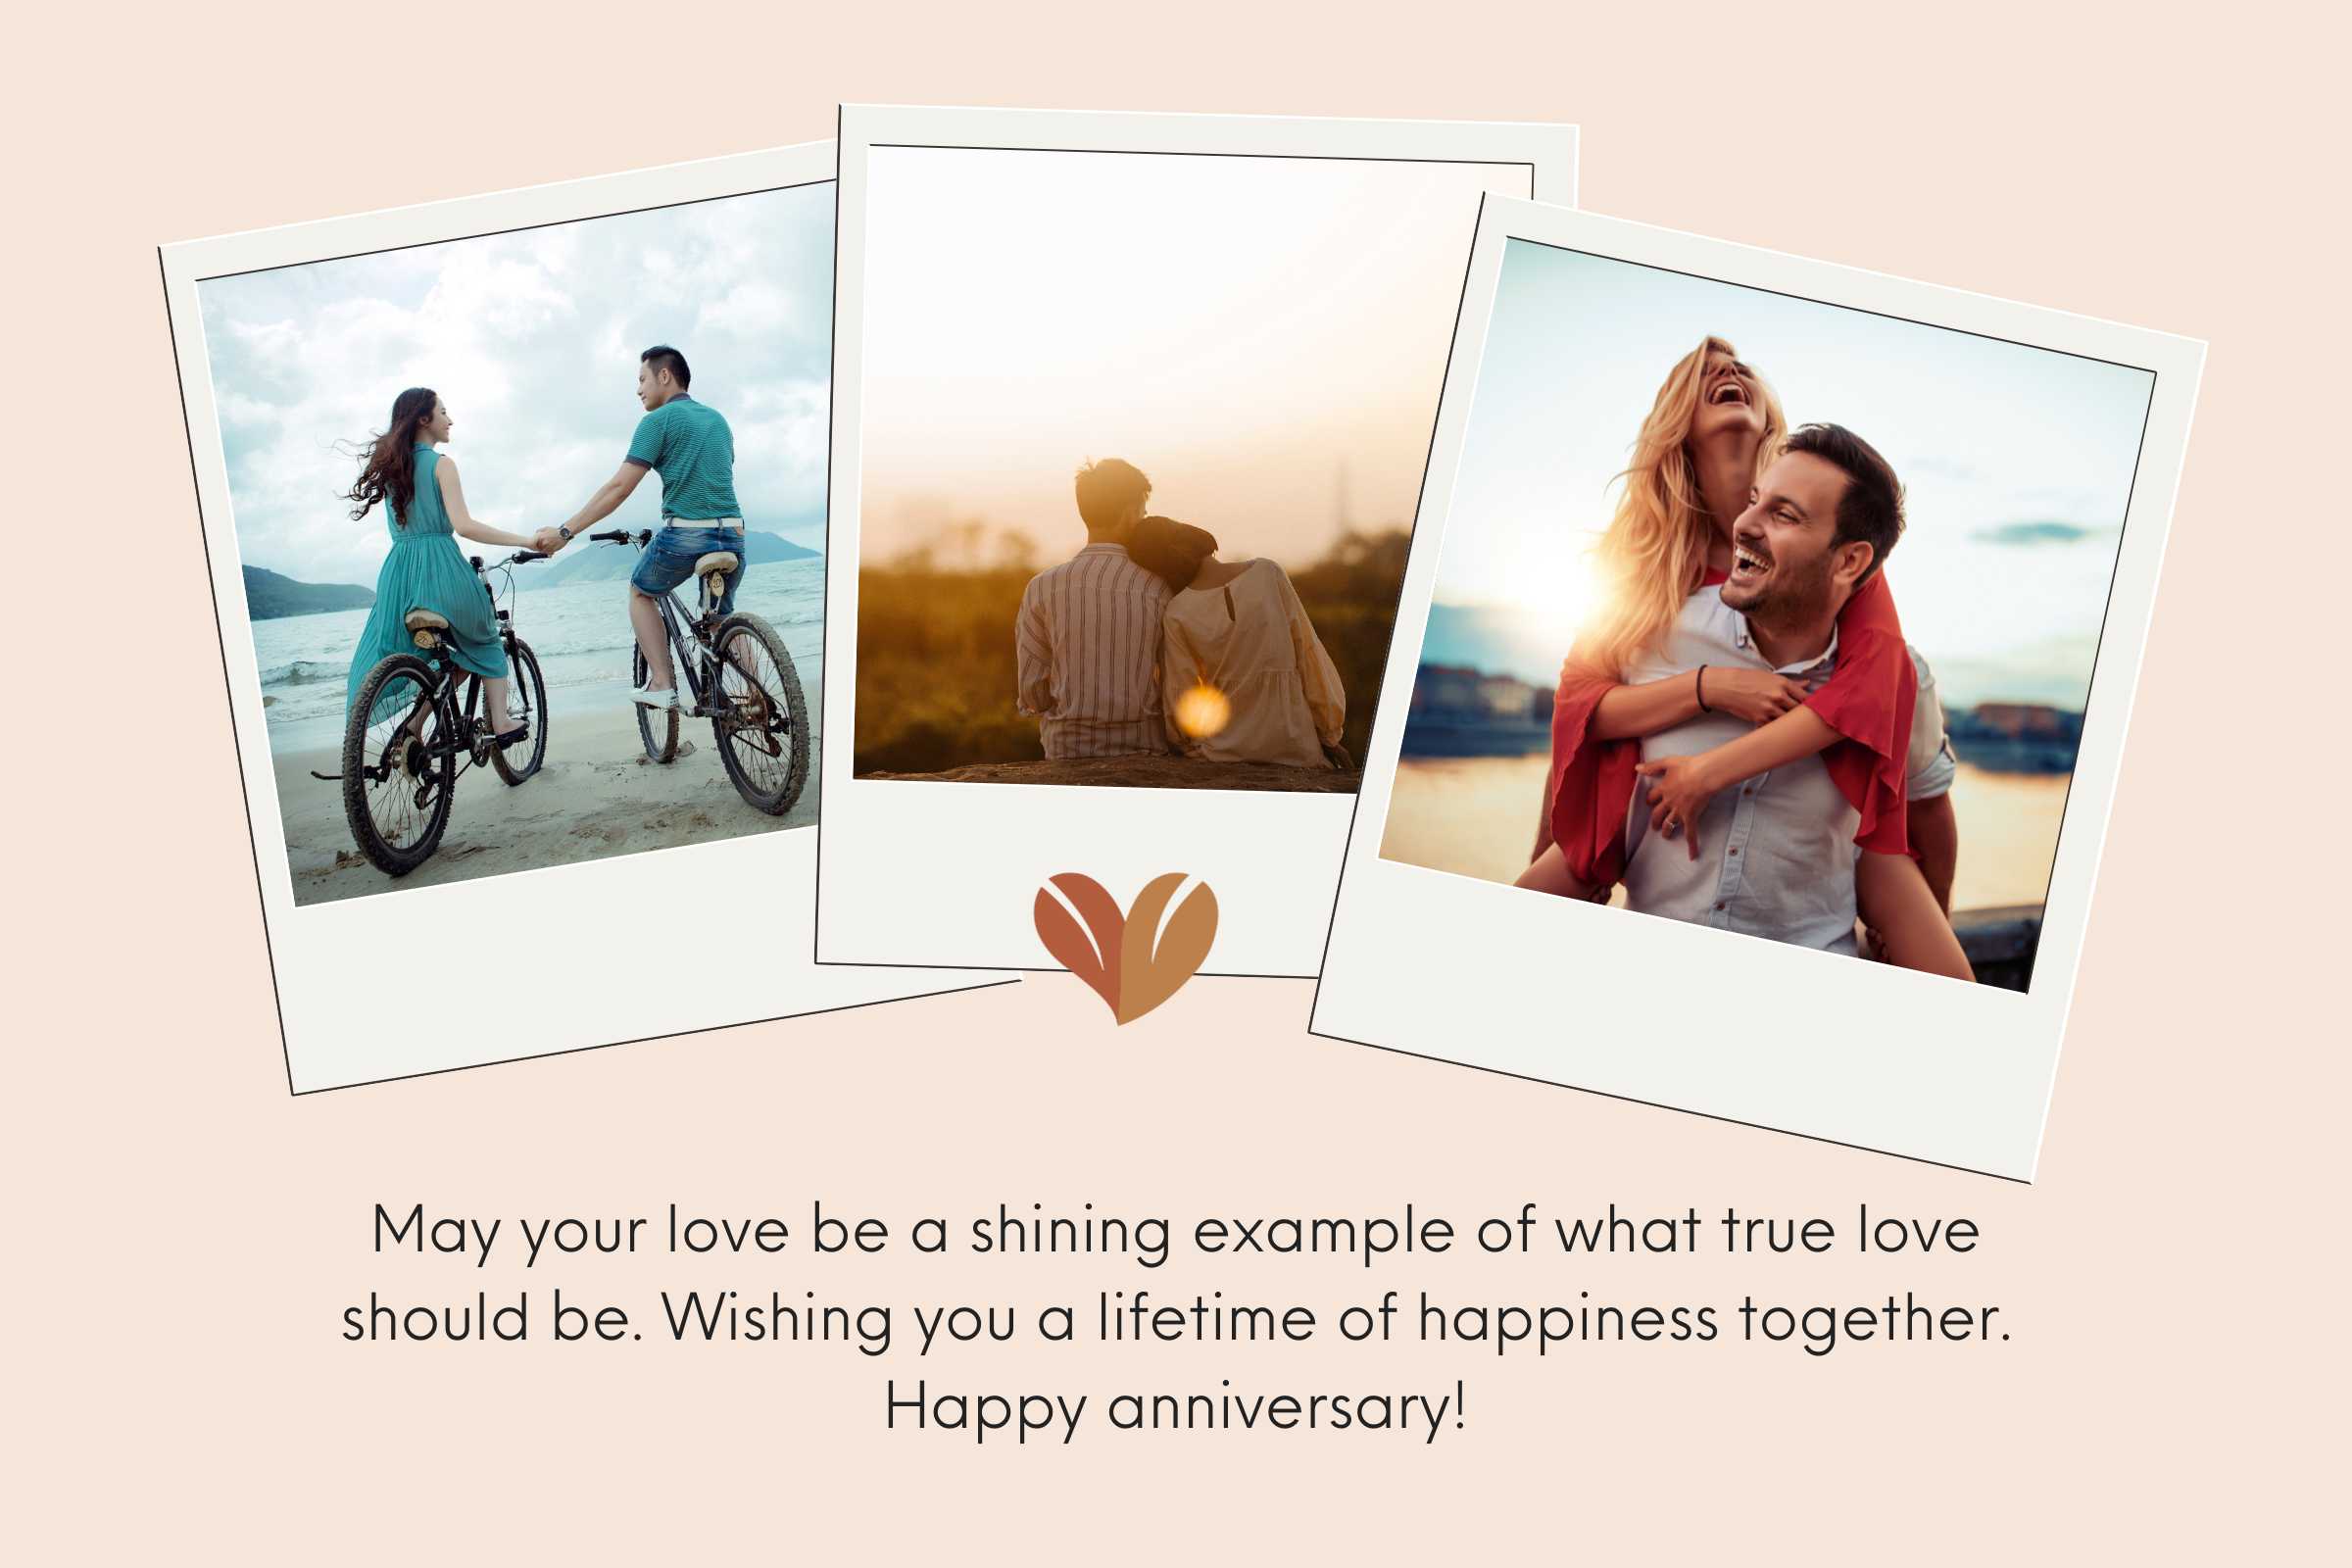 May the love you share continue to grow and blossom - Anniversary wishes for couple